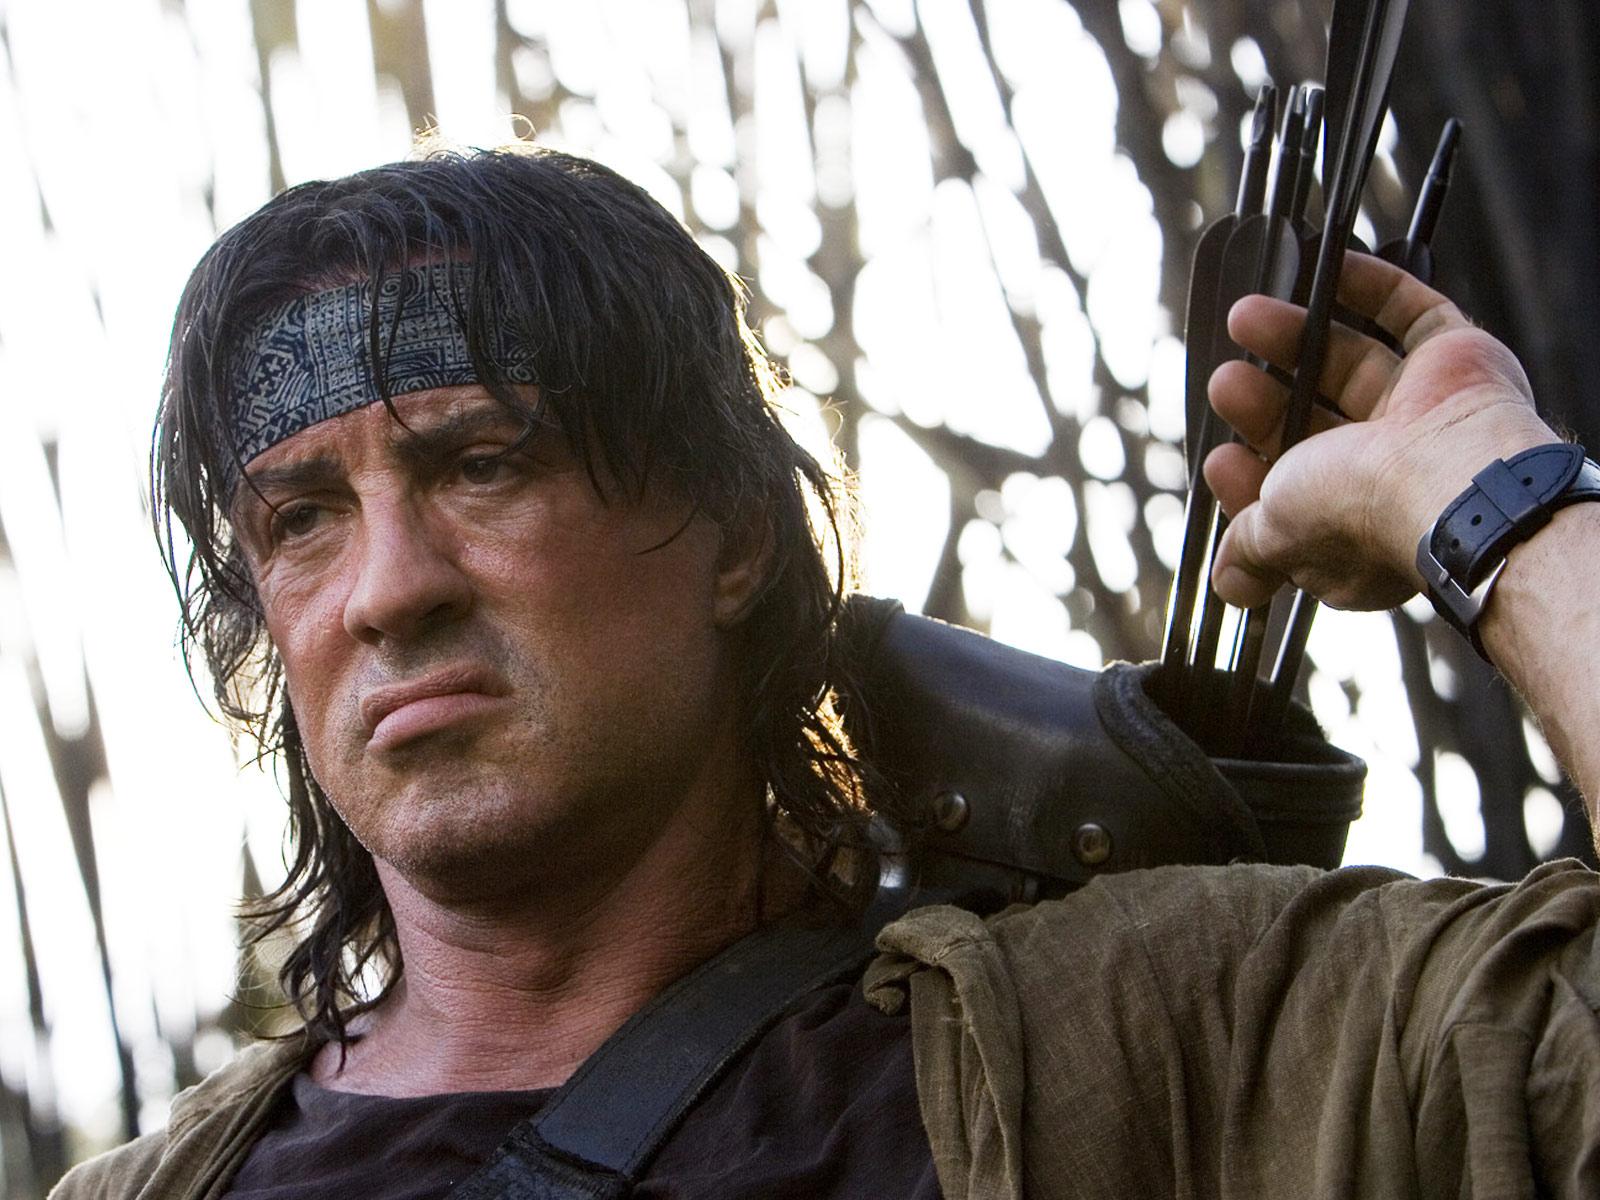 Rambo 5' Character and Plot Details Emerge as Casting Begins